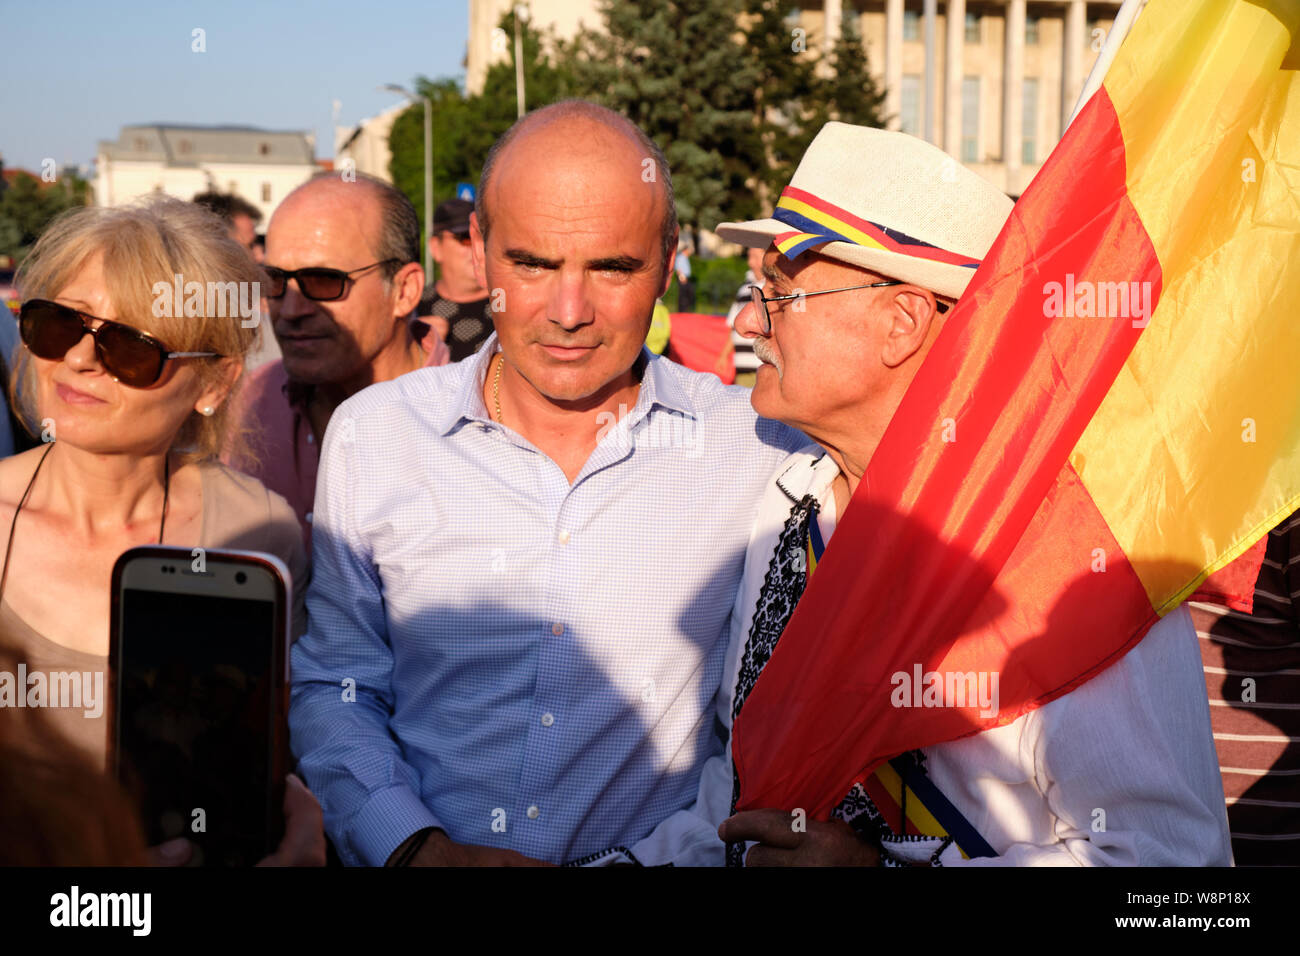 Bucharest, Romania. 10th August 2019. Rareș Bogdan, PNL member of European Parliament arrives at Victory Square to join the protest against allegations of on-going corruption within the government of Romania.  Event takes place on the anniversary of last year’s violent confrontation in the city. Credit: JF Pelletier/Alamy Live News. Stock Photo